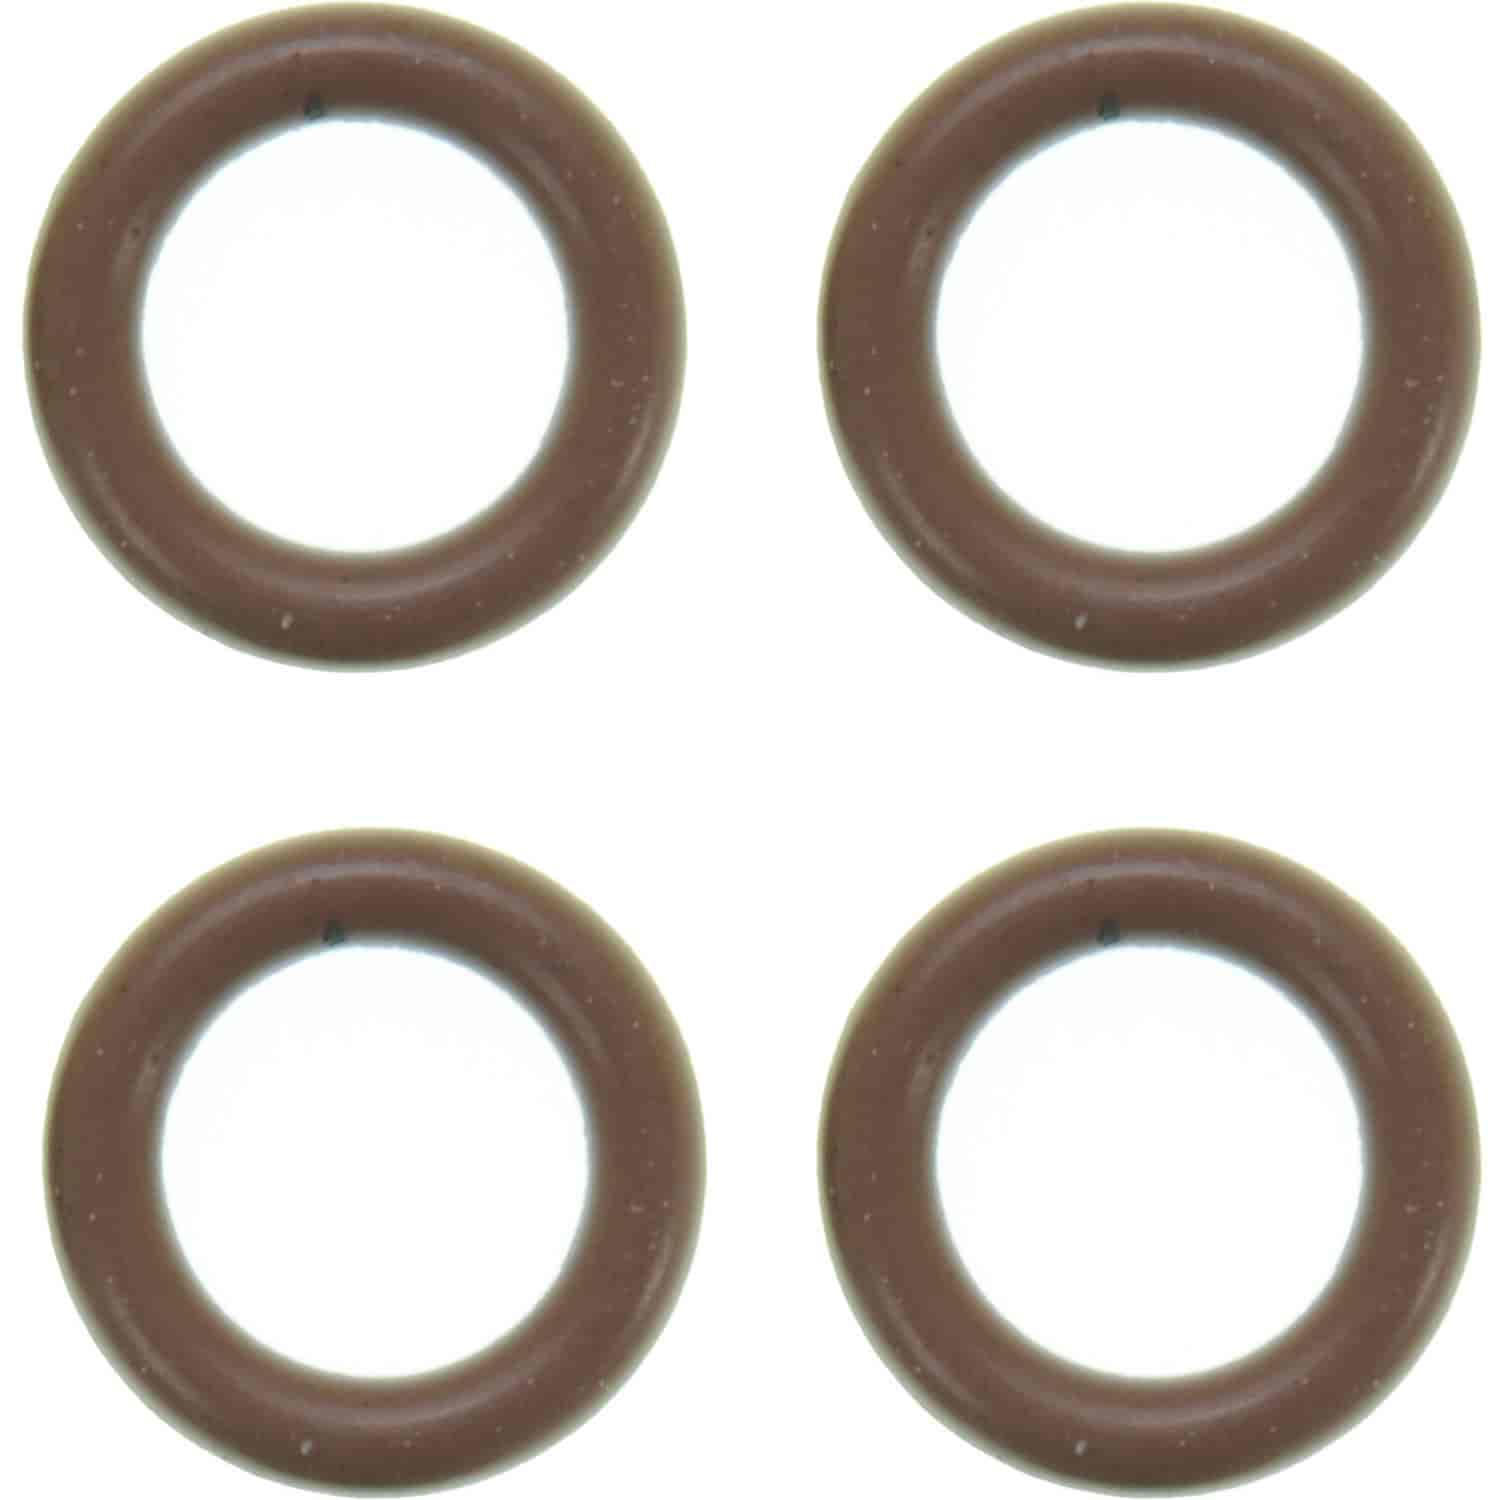 Fuel Injection O-Ring GMC 2.2L 2000-2002 2.4L 1999-2002